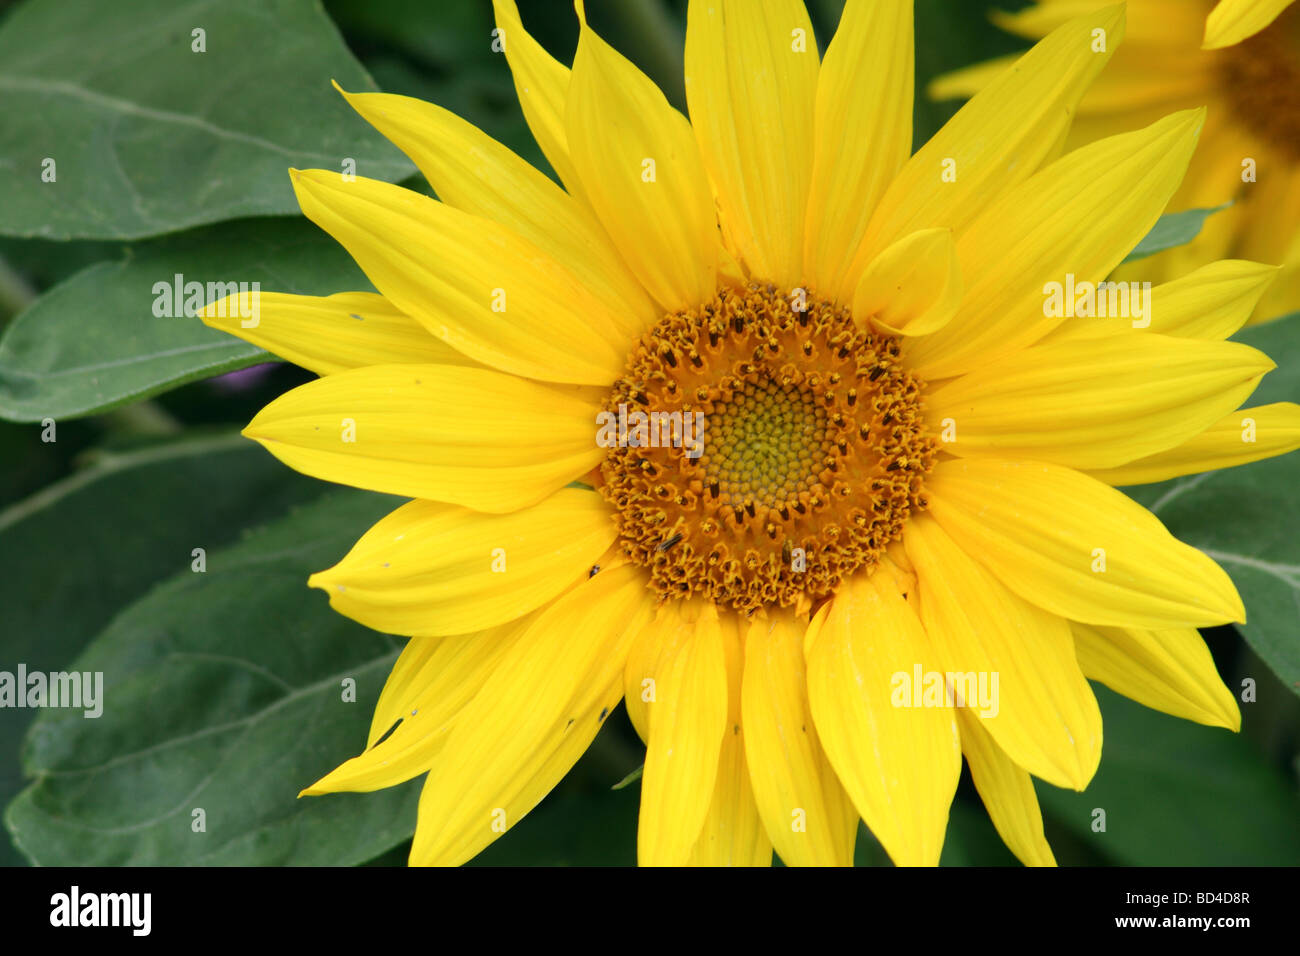 Sunflower Head with Ray Florets and Disc Florets Stock Photo